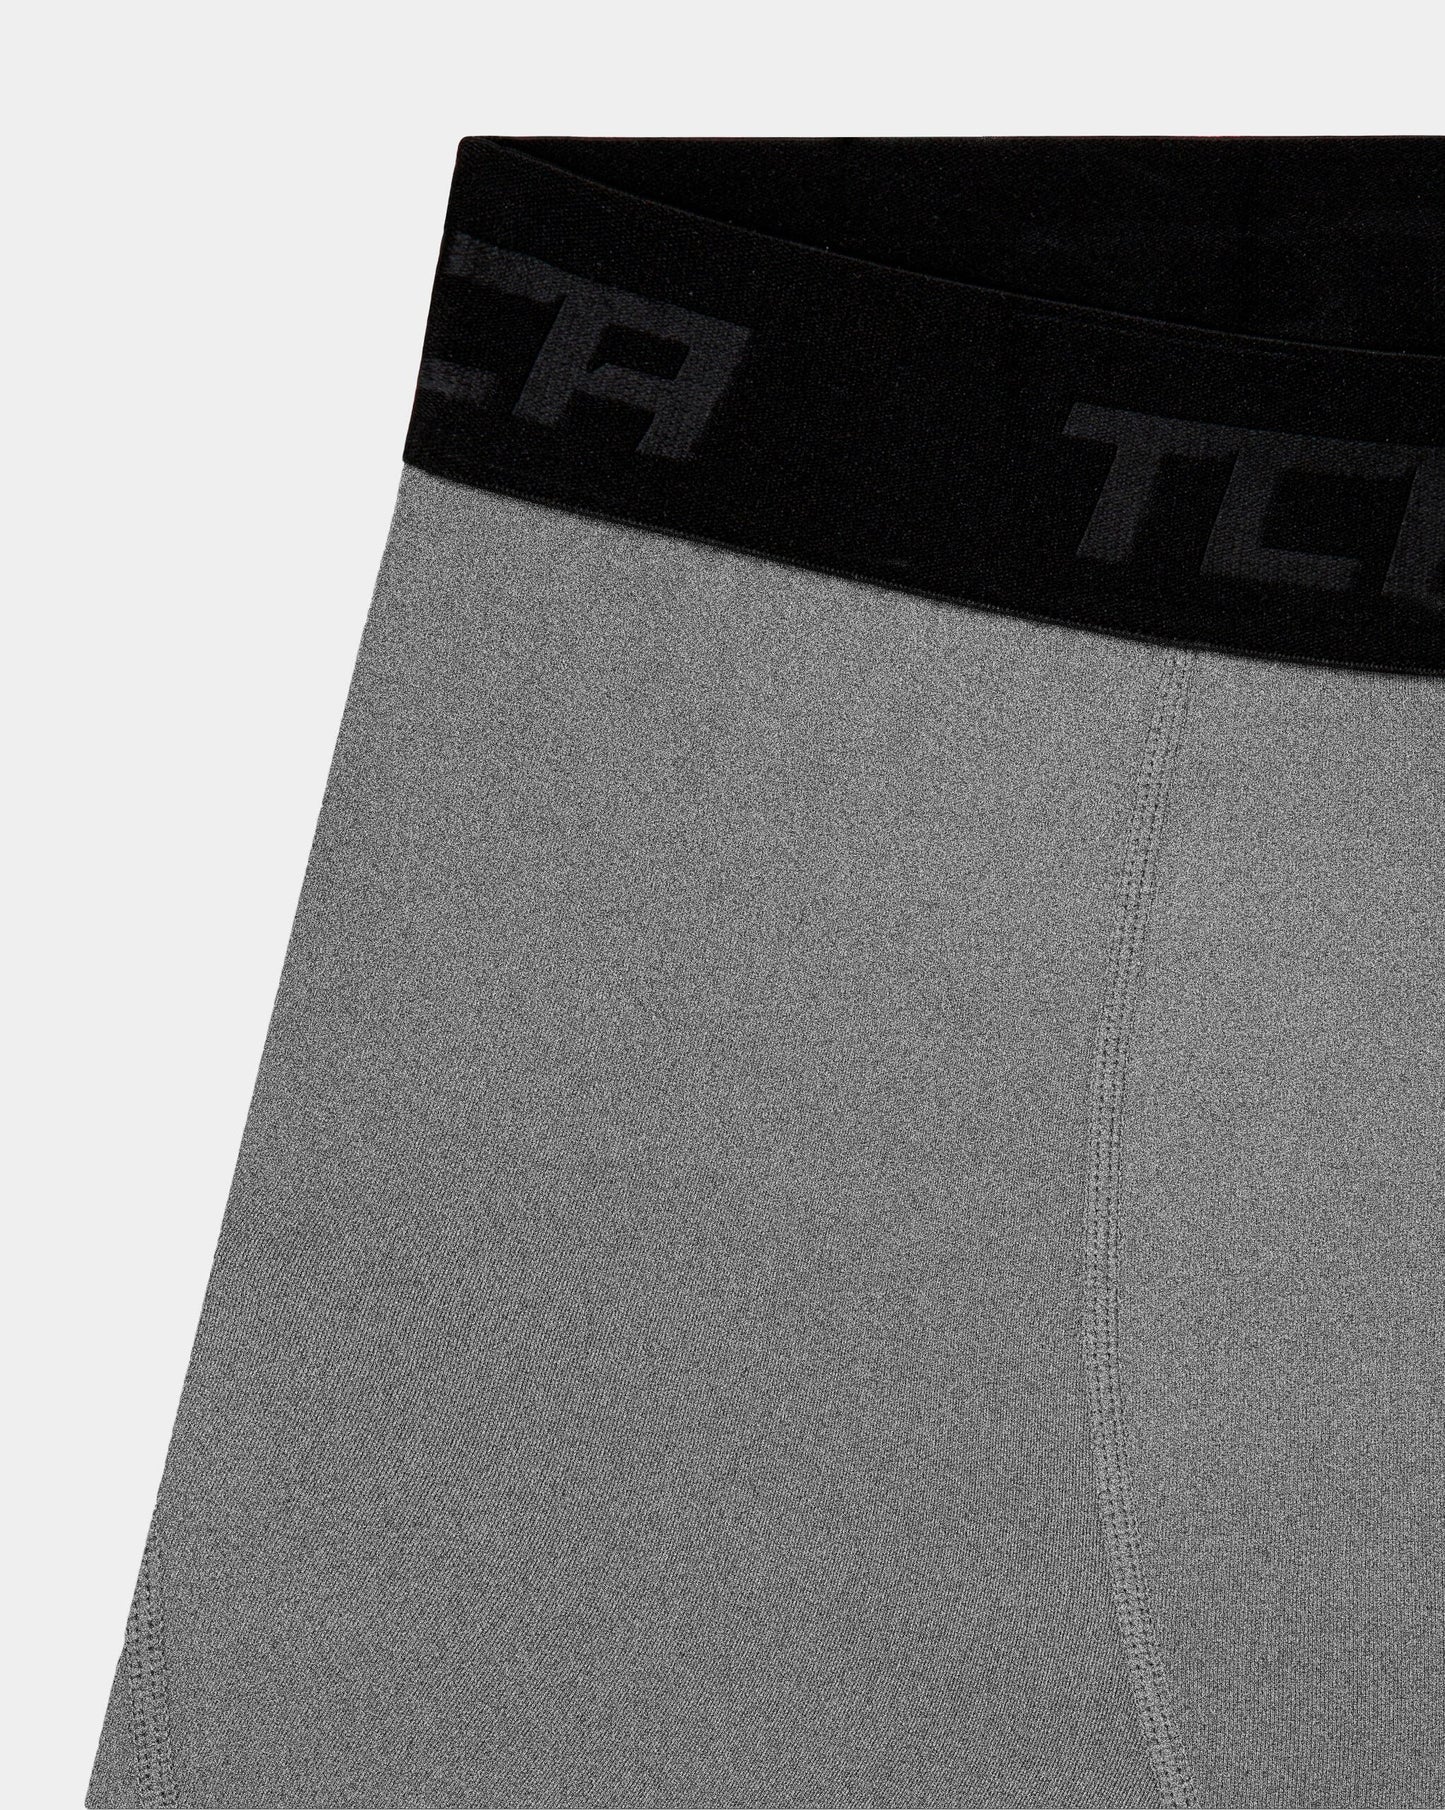 Pro Performance Compression Base Layer Tights For Boys